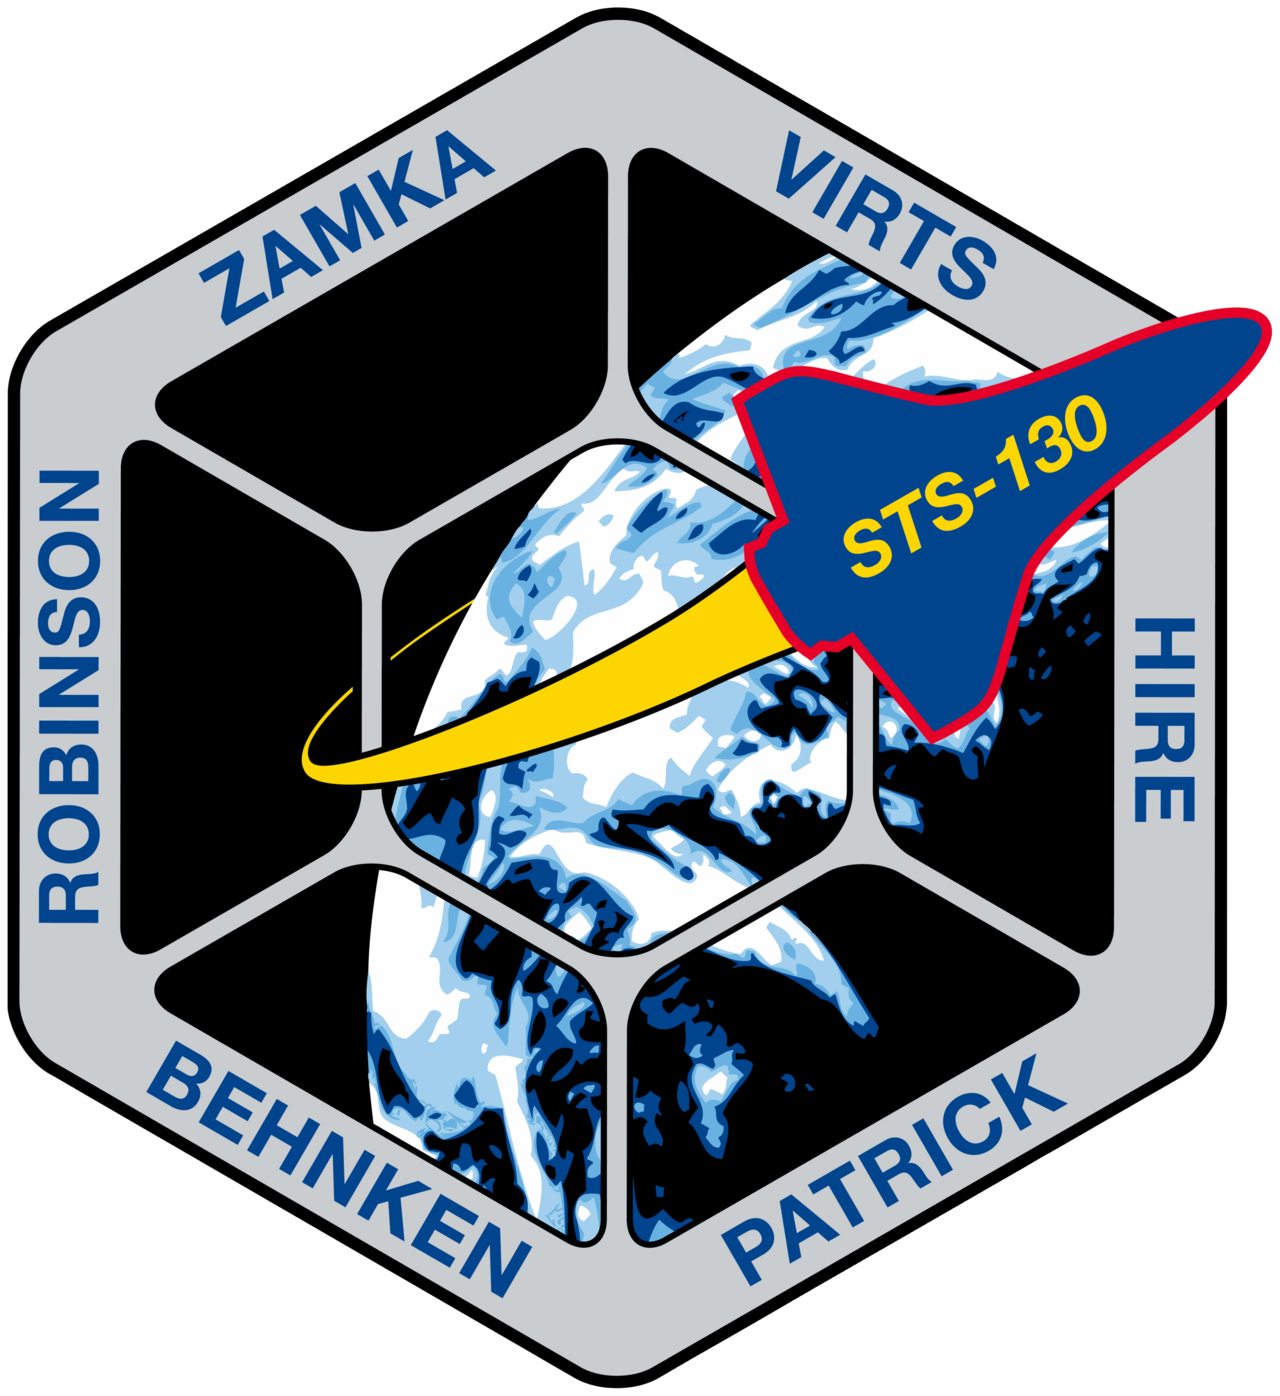 Mission patch for STS-130